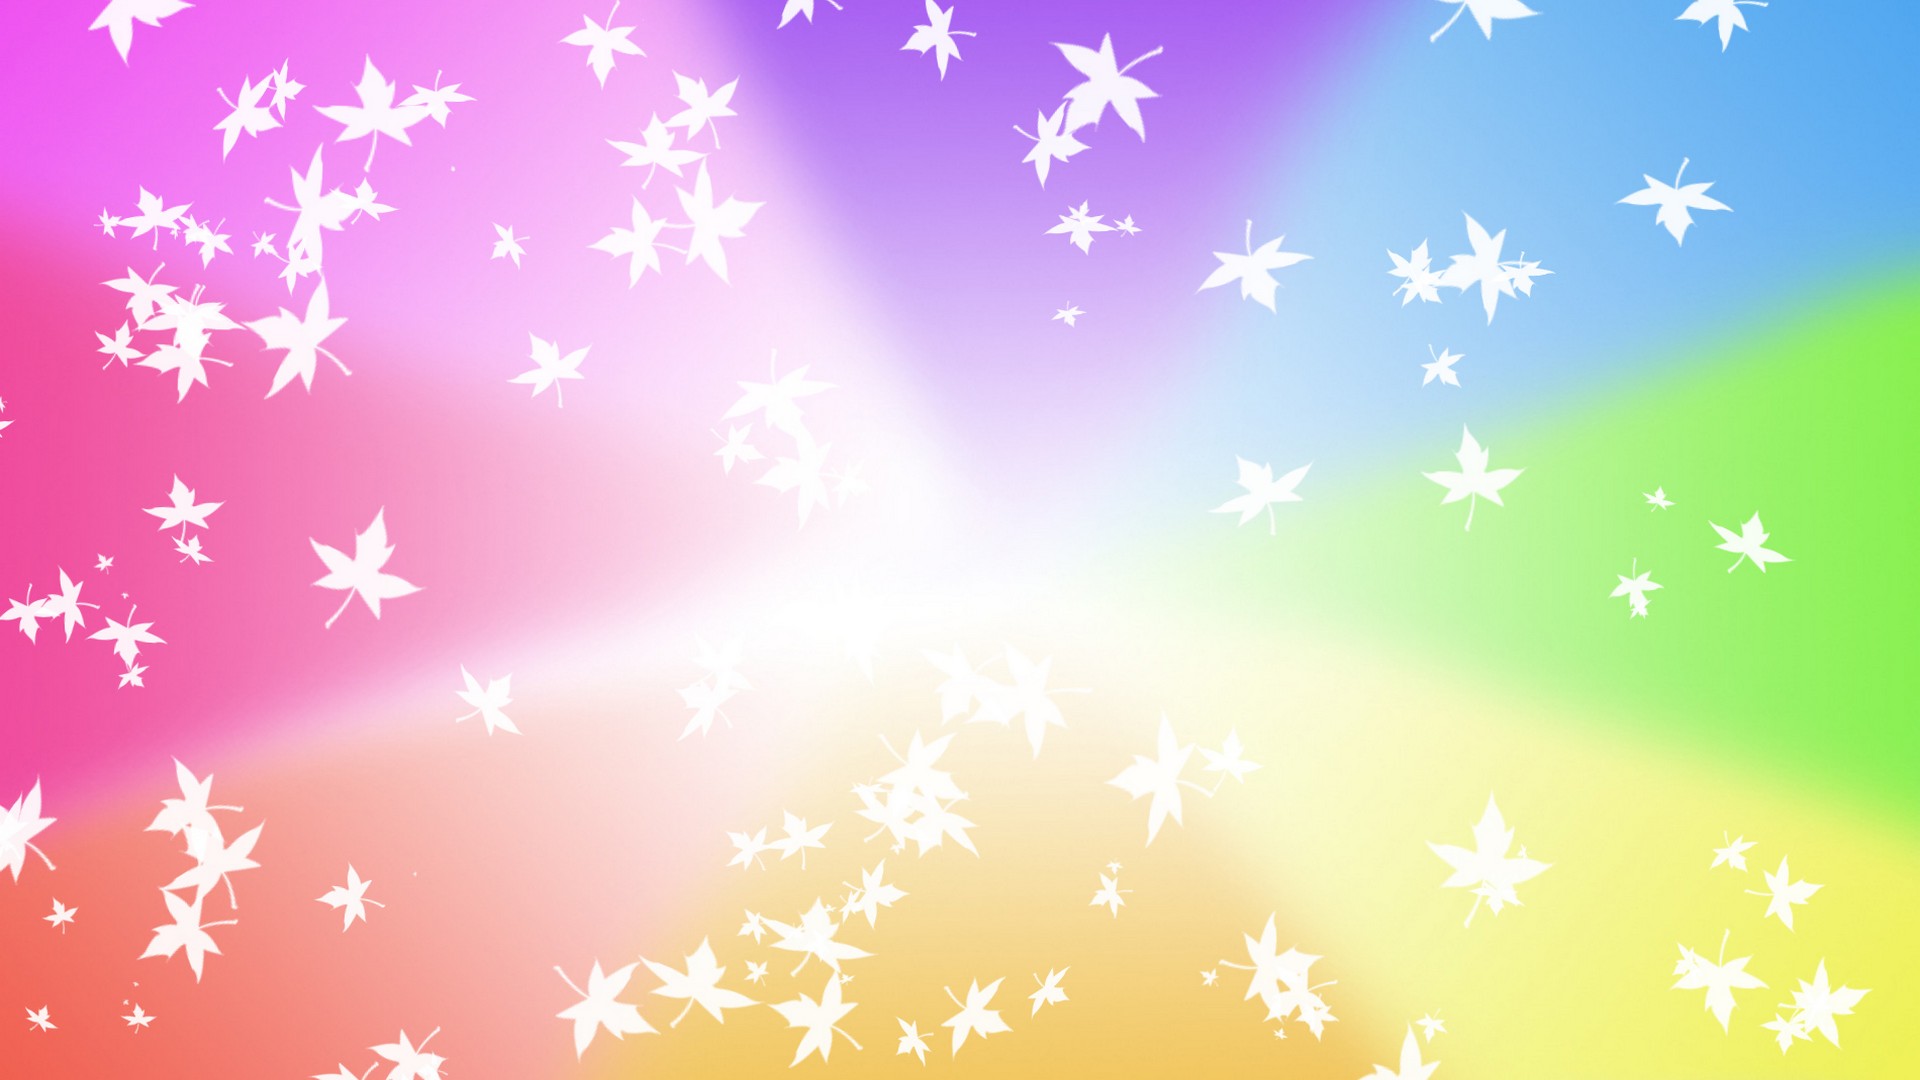 Rainbow Desktop Wallpaper with resolution 1920X1080 pixel. You can use this wallpaper as background for your desktop Computer Screensavers, Android or iPhone smartphones